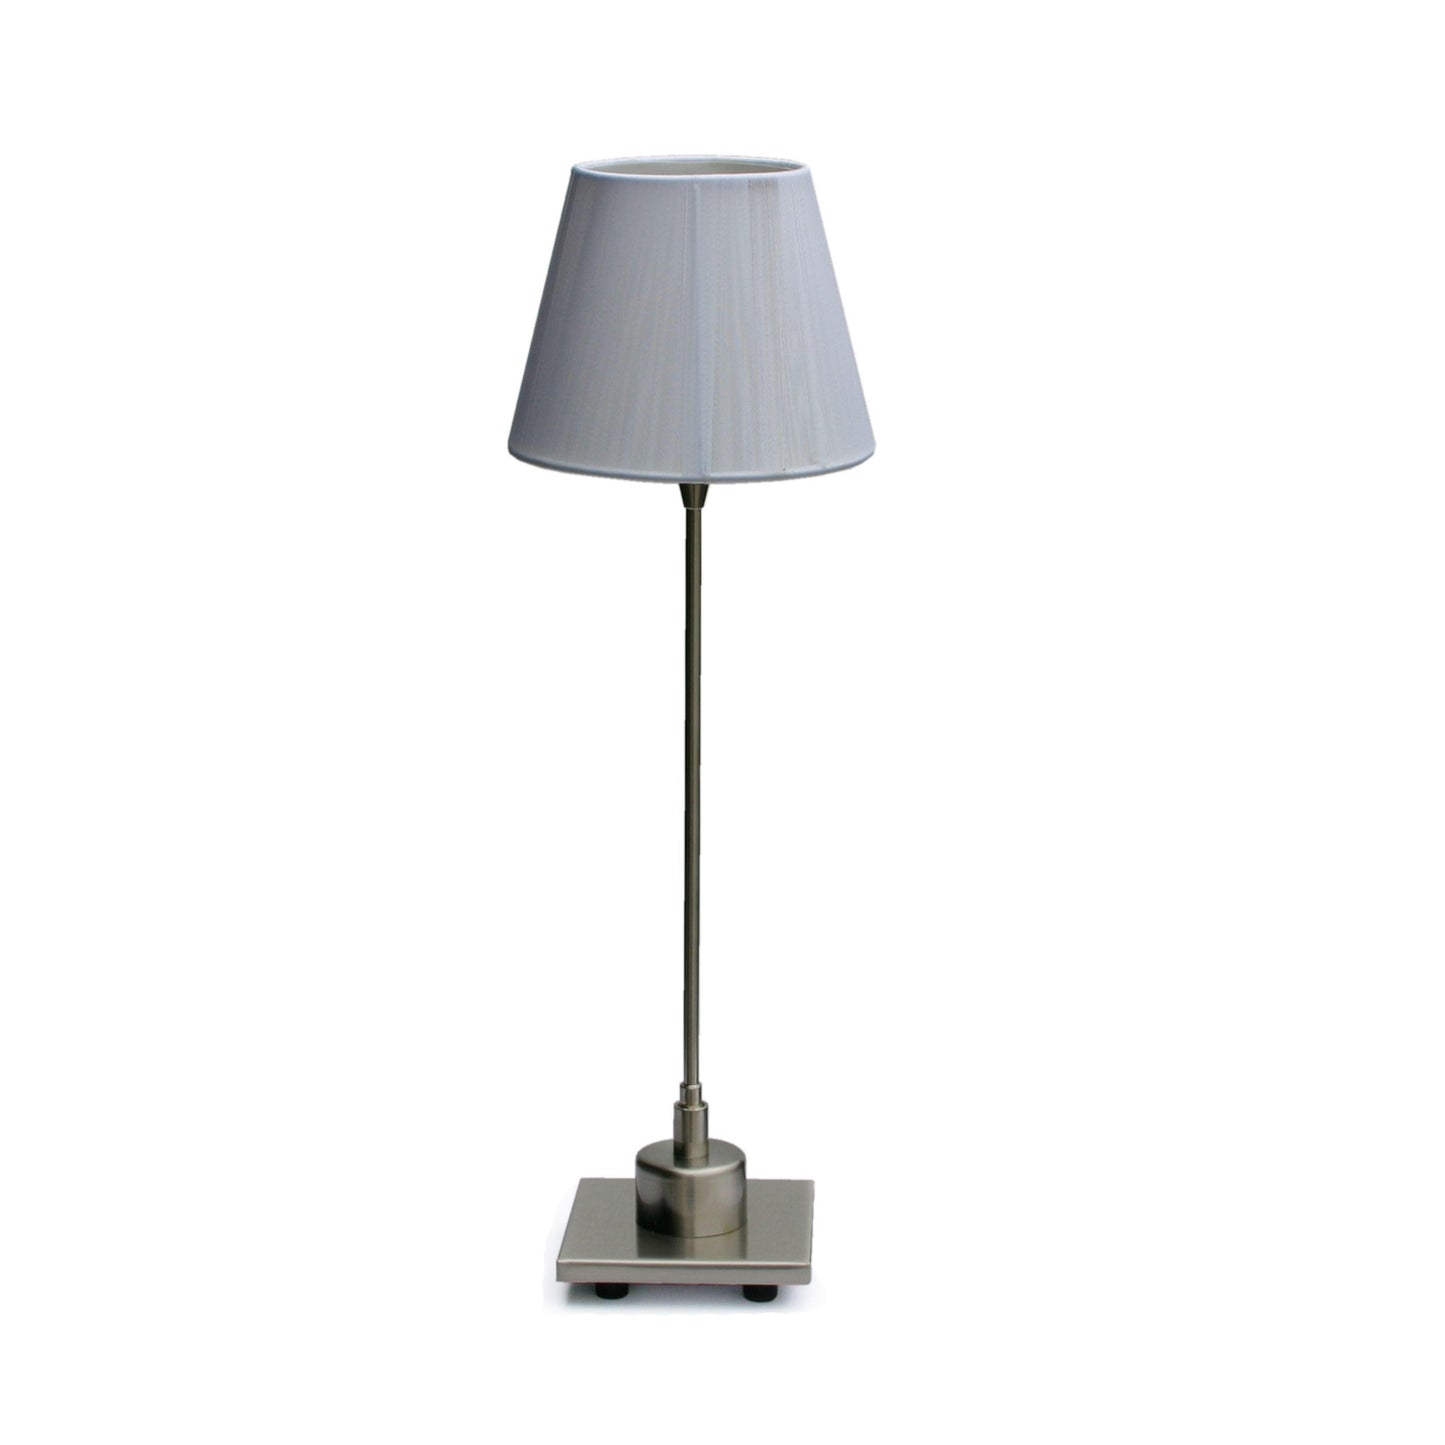 Gemini Low Voltage Table Lamp With White Shade - V&M IMPORTS Australia